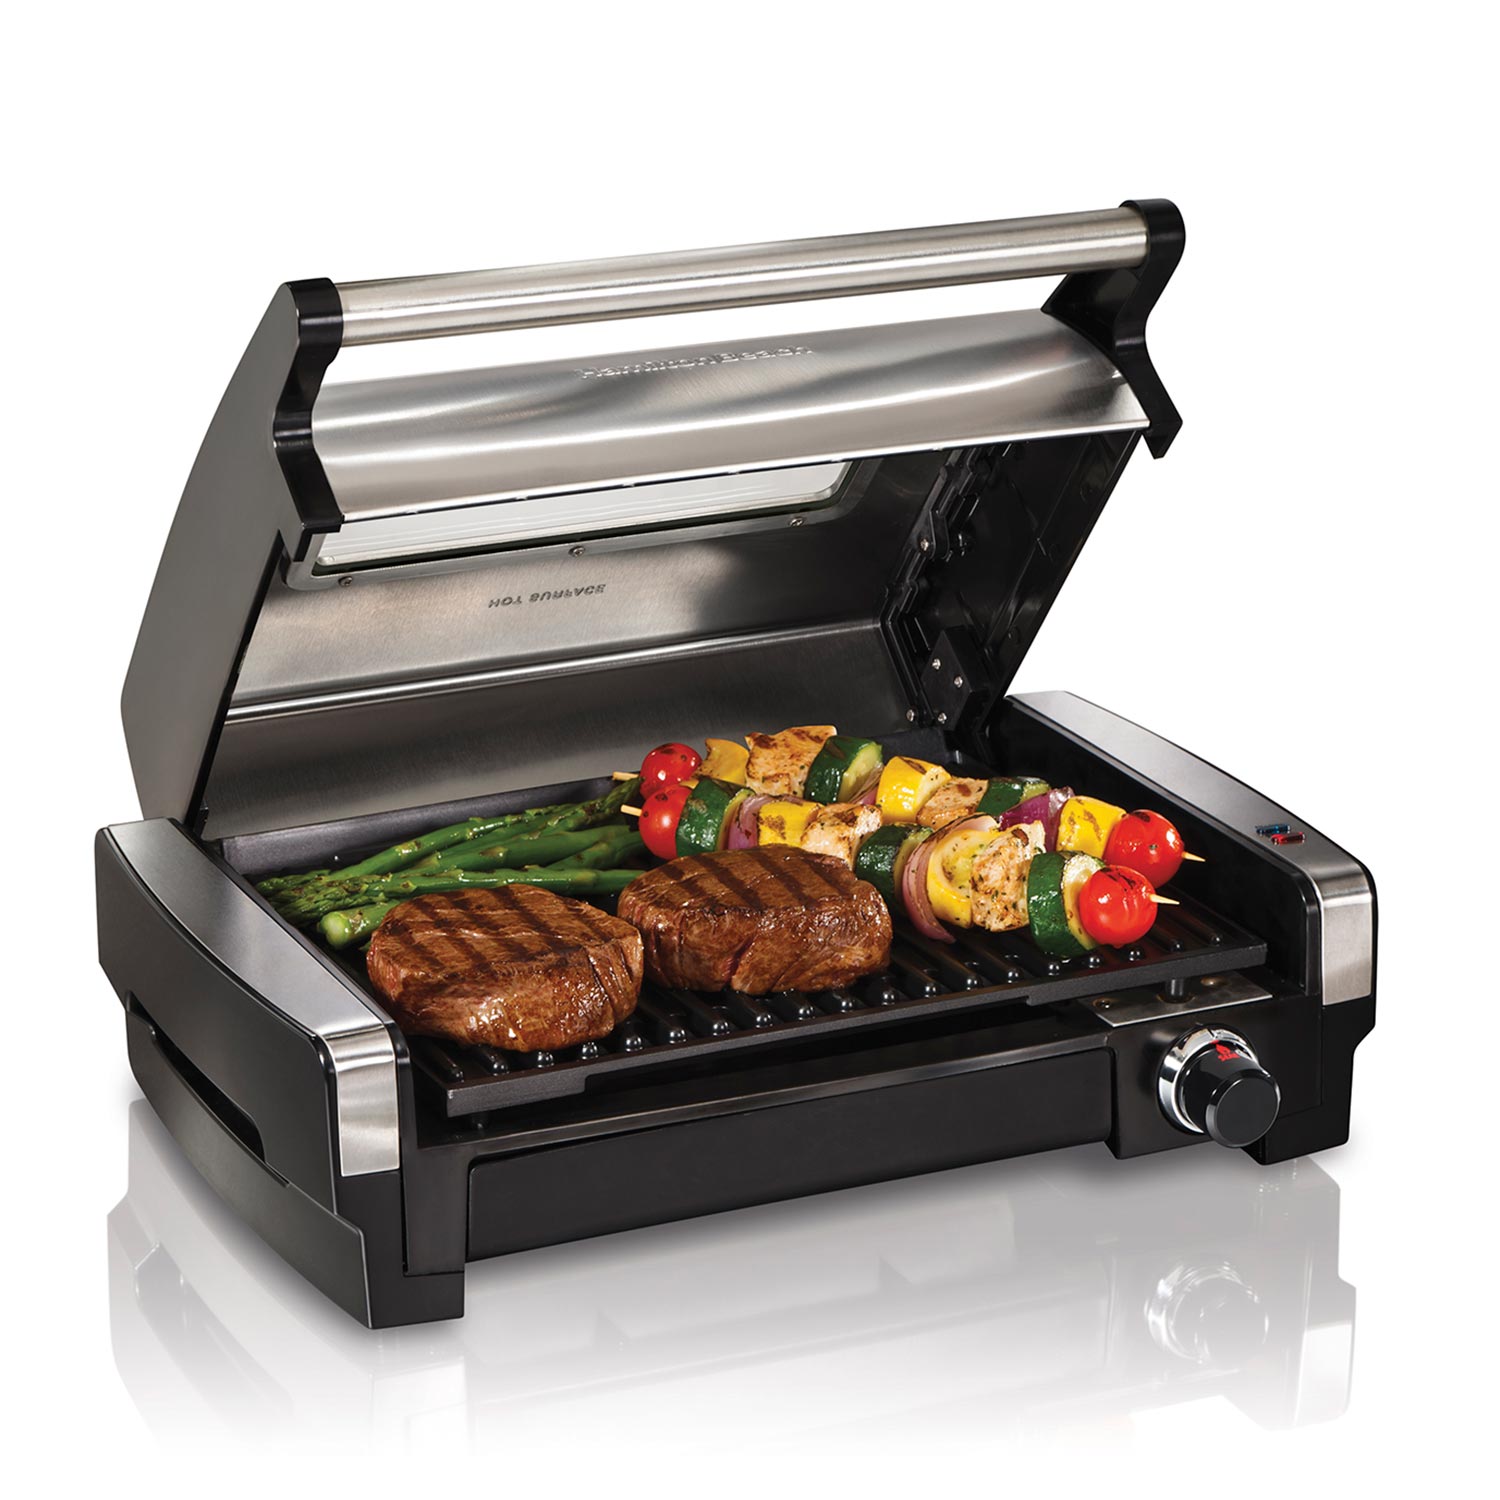 Searing Grill with Lid Window (25361)